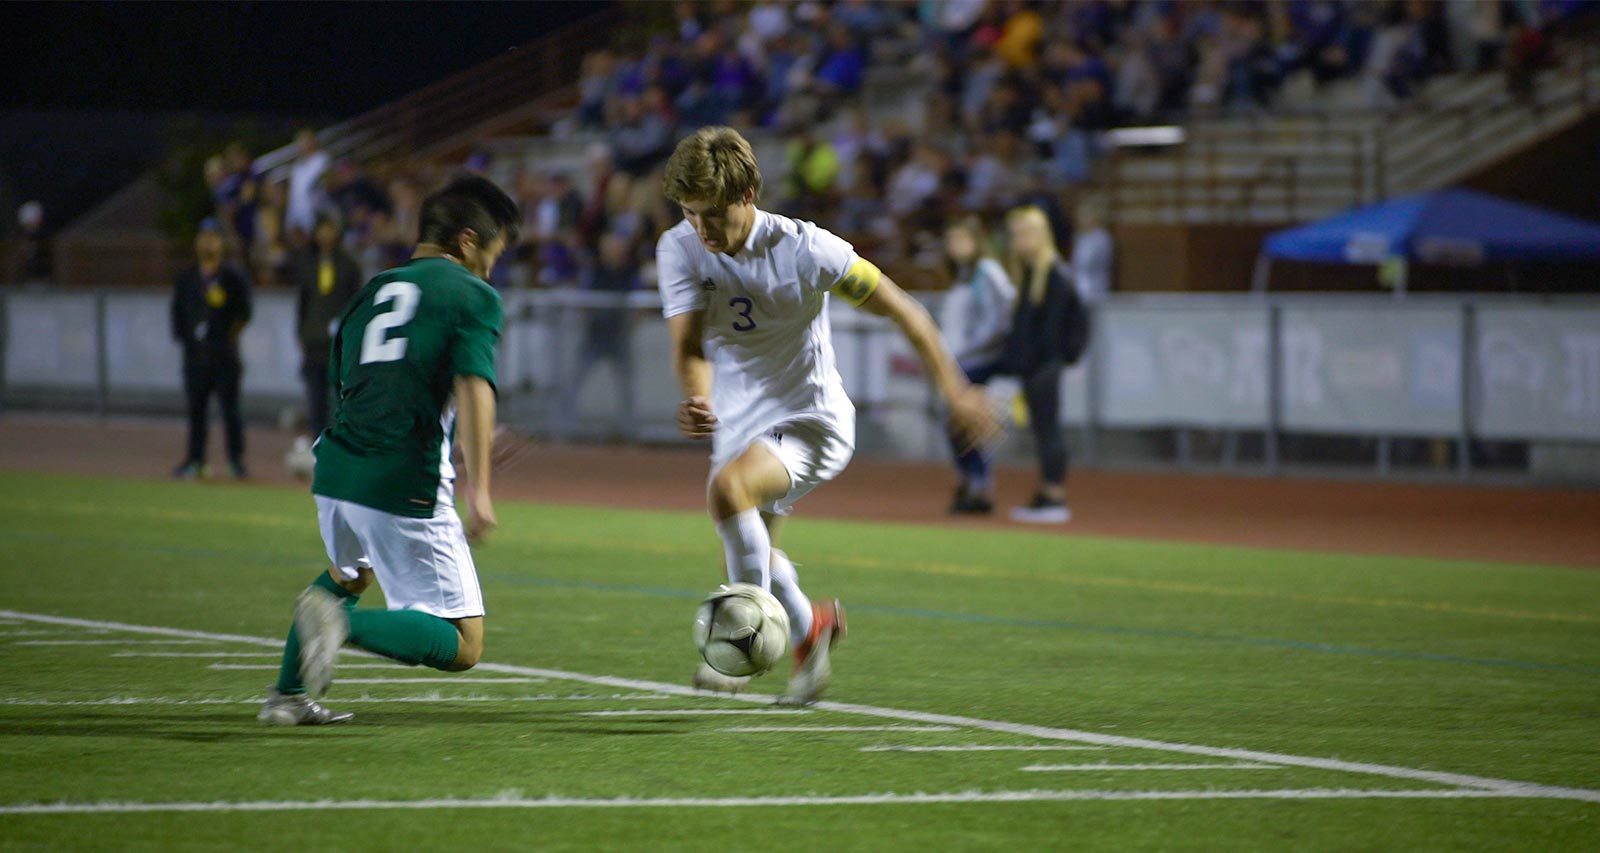 The Sumner captain takes on a Skyline defender at the 2018 Washington State Soccer Championship semifinal